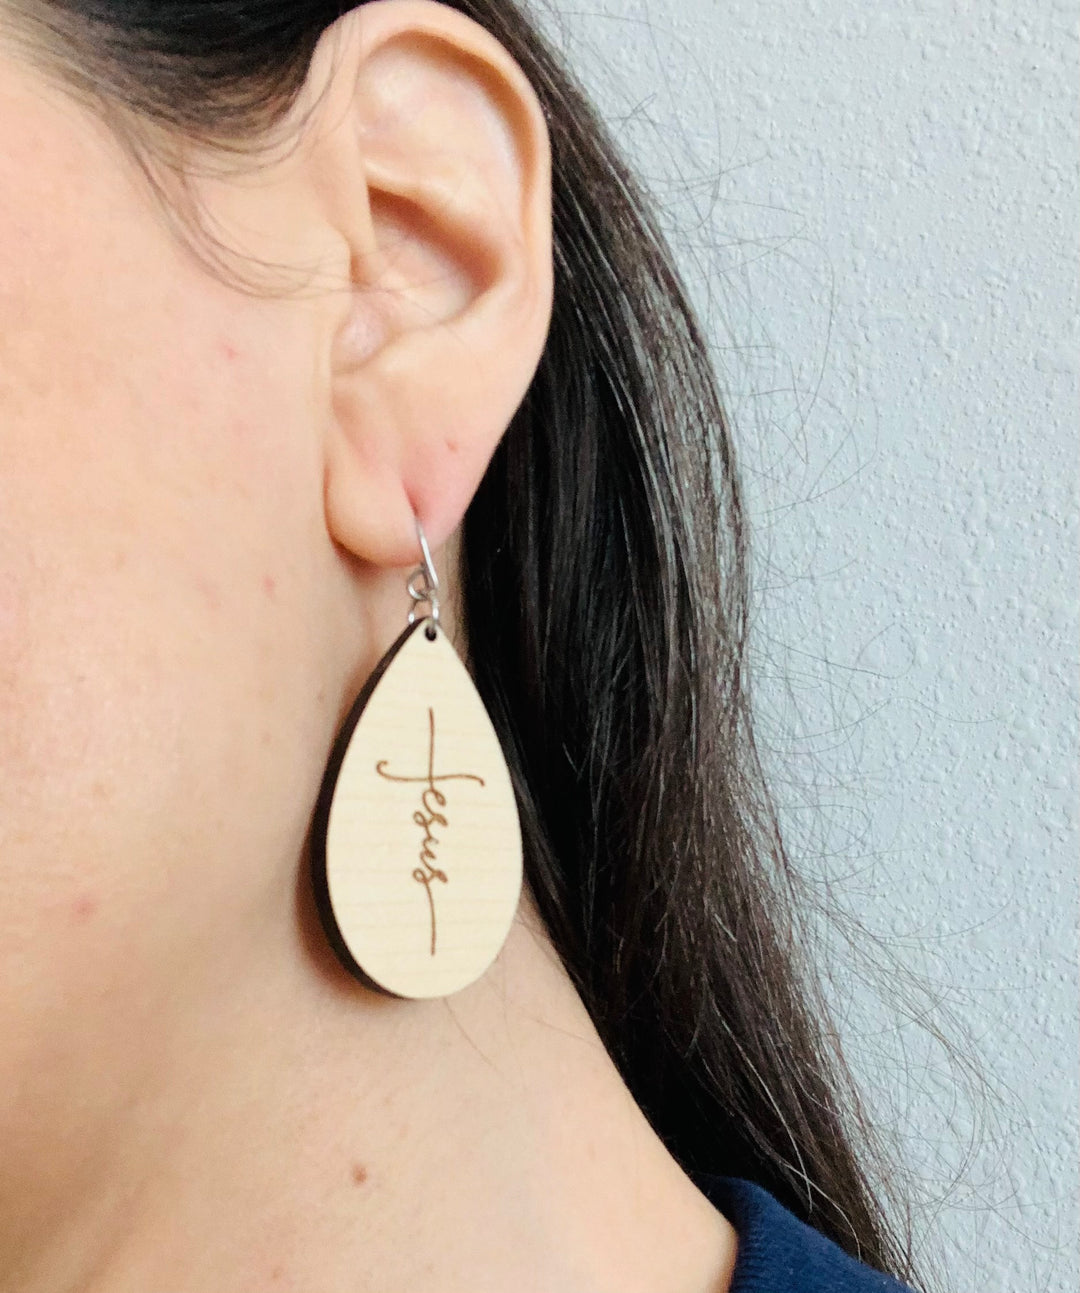 Jesus with Cross - Laser Engraved USA Hand-Made Maple Wood Earrings - Joy & Country